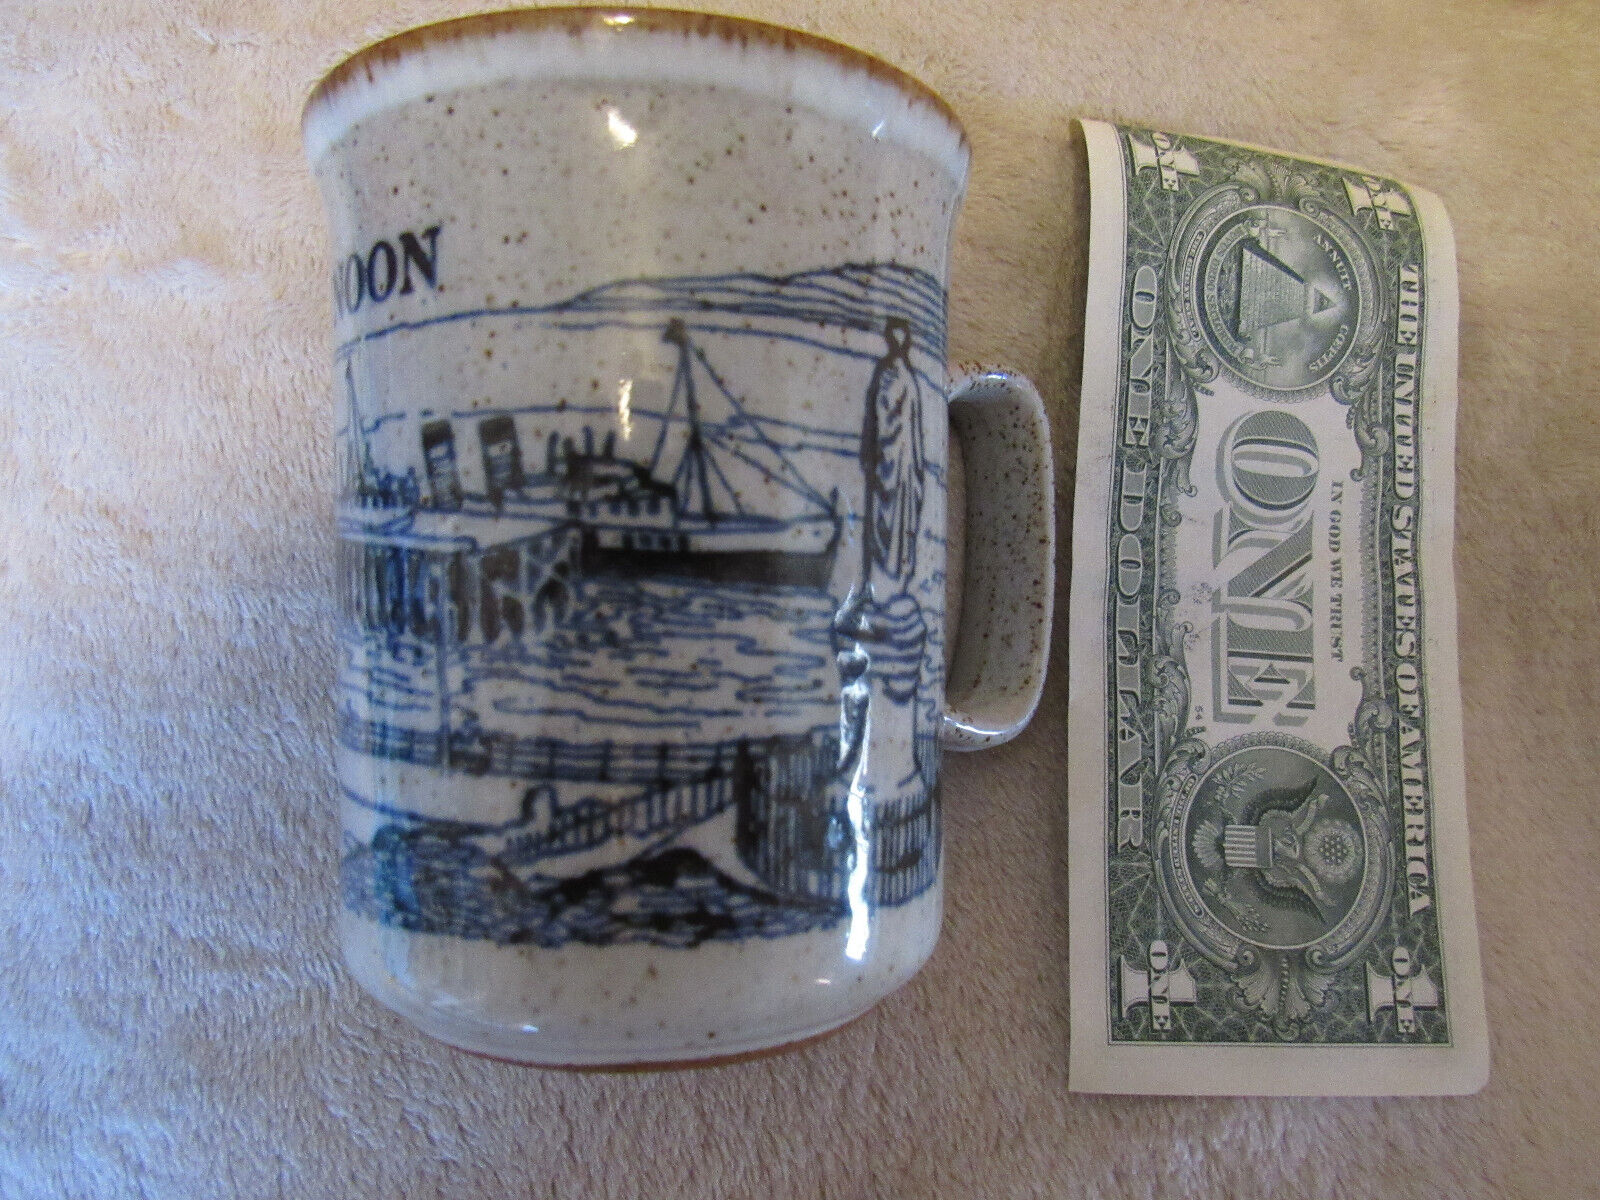 VTG Dunoon Ceramics Mug Gray Embossed Speckled Coffee Tea Cup Made  in  Scotland